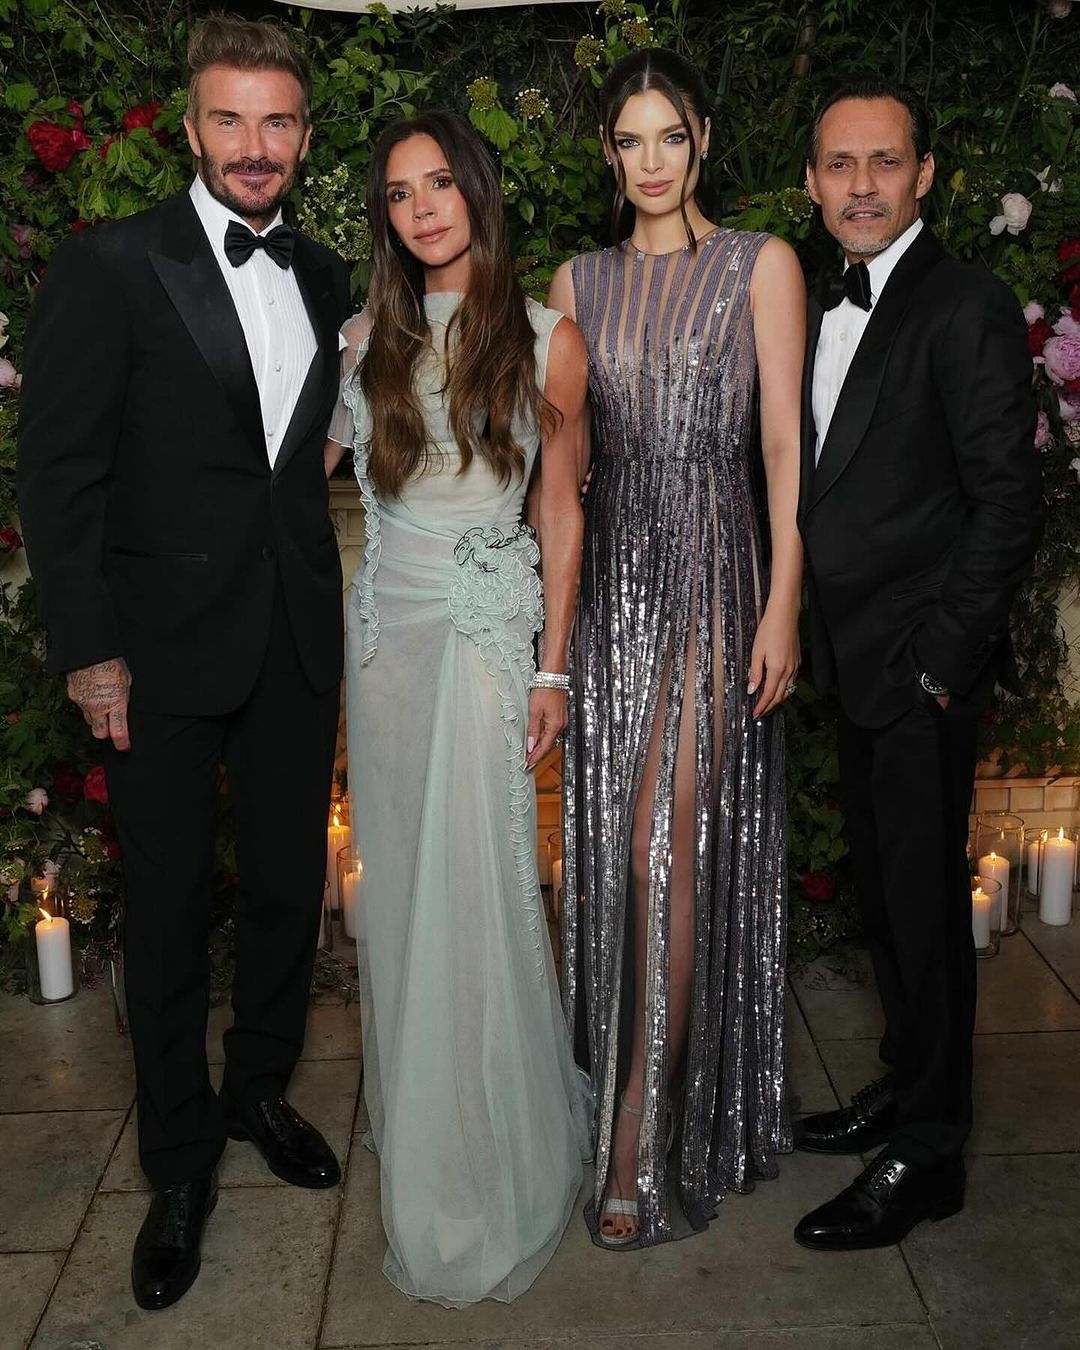 David Beckham, Victoria Beckham, Nadia Ferreira, and Marc Anthony at Victoria's birthday Party in London, England, from a Instagram post dated April 22, 2024. | Source: Instagram/davidbeckham/